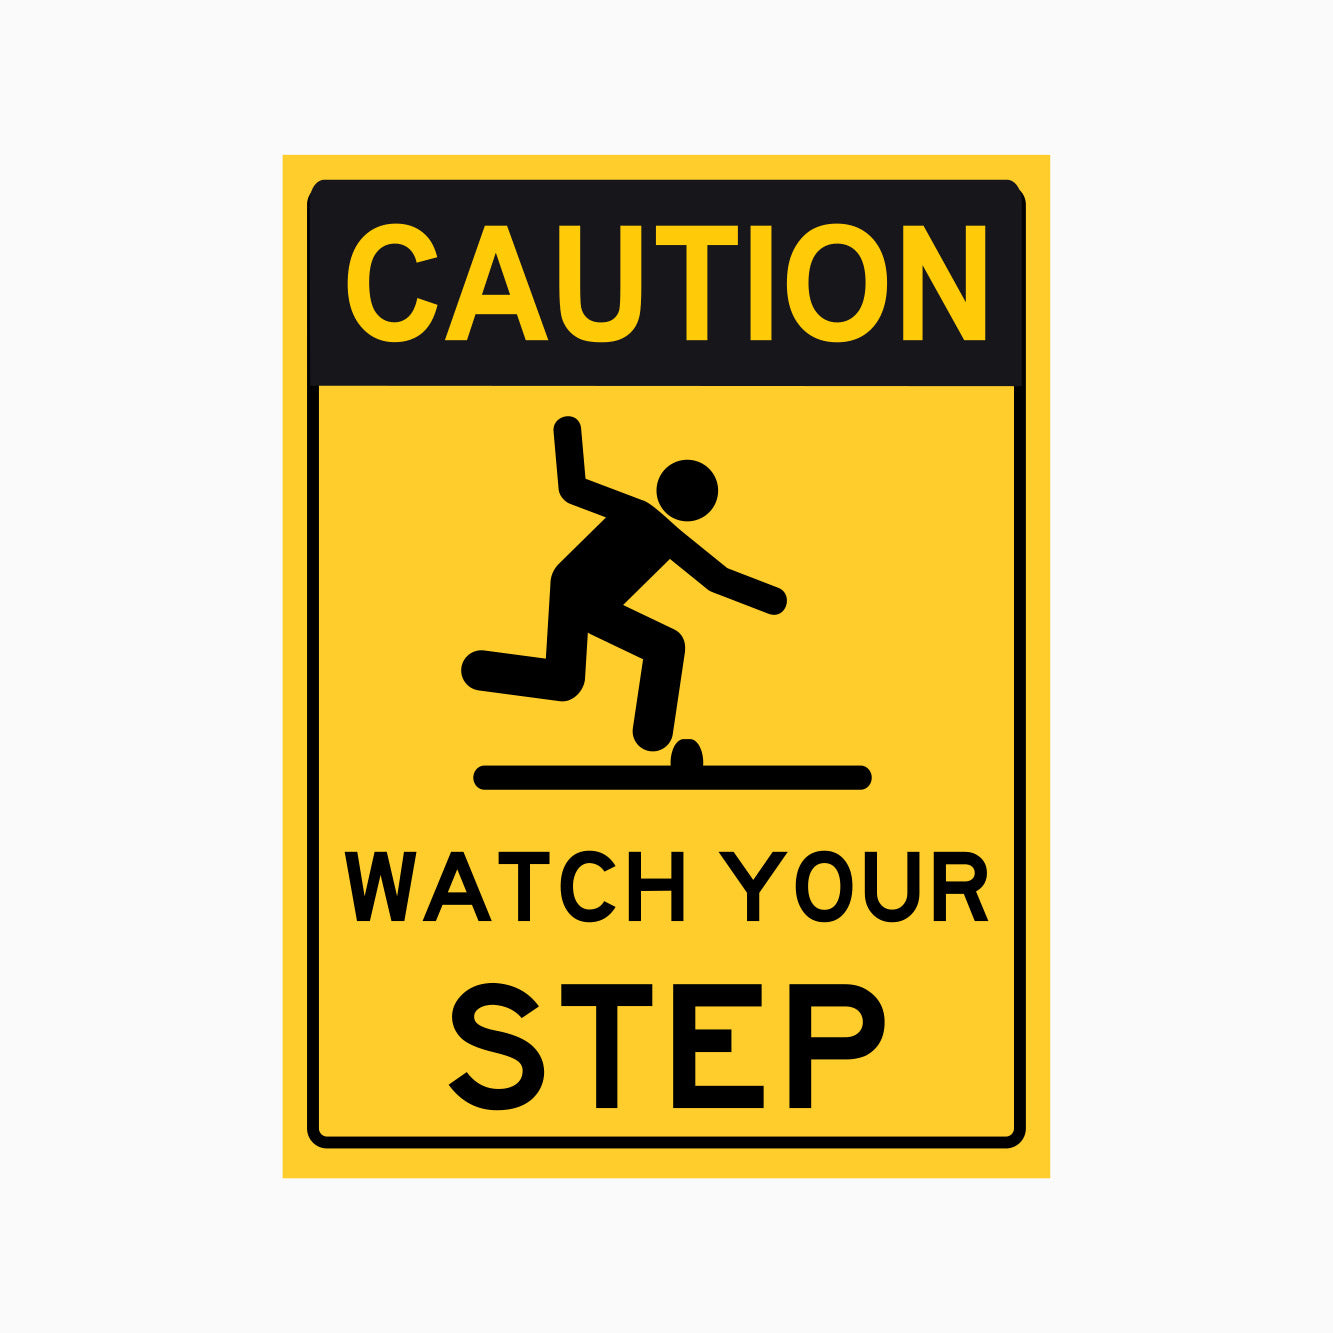 CAUTION SIGN - WATCH YOUR STEP SIGN